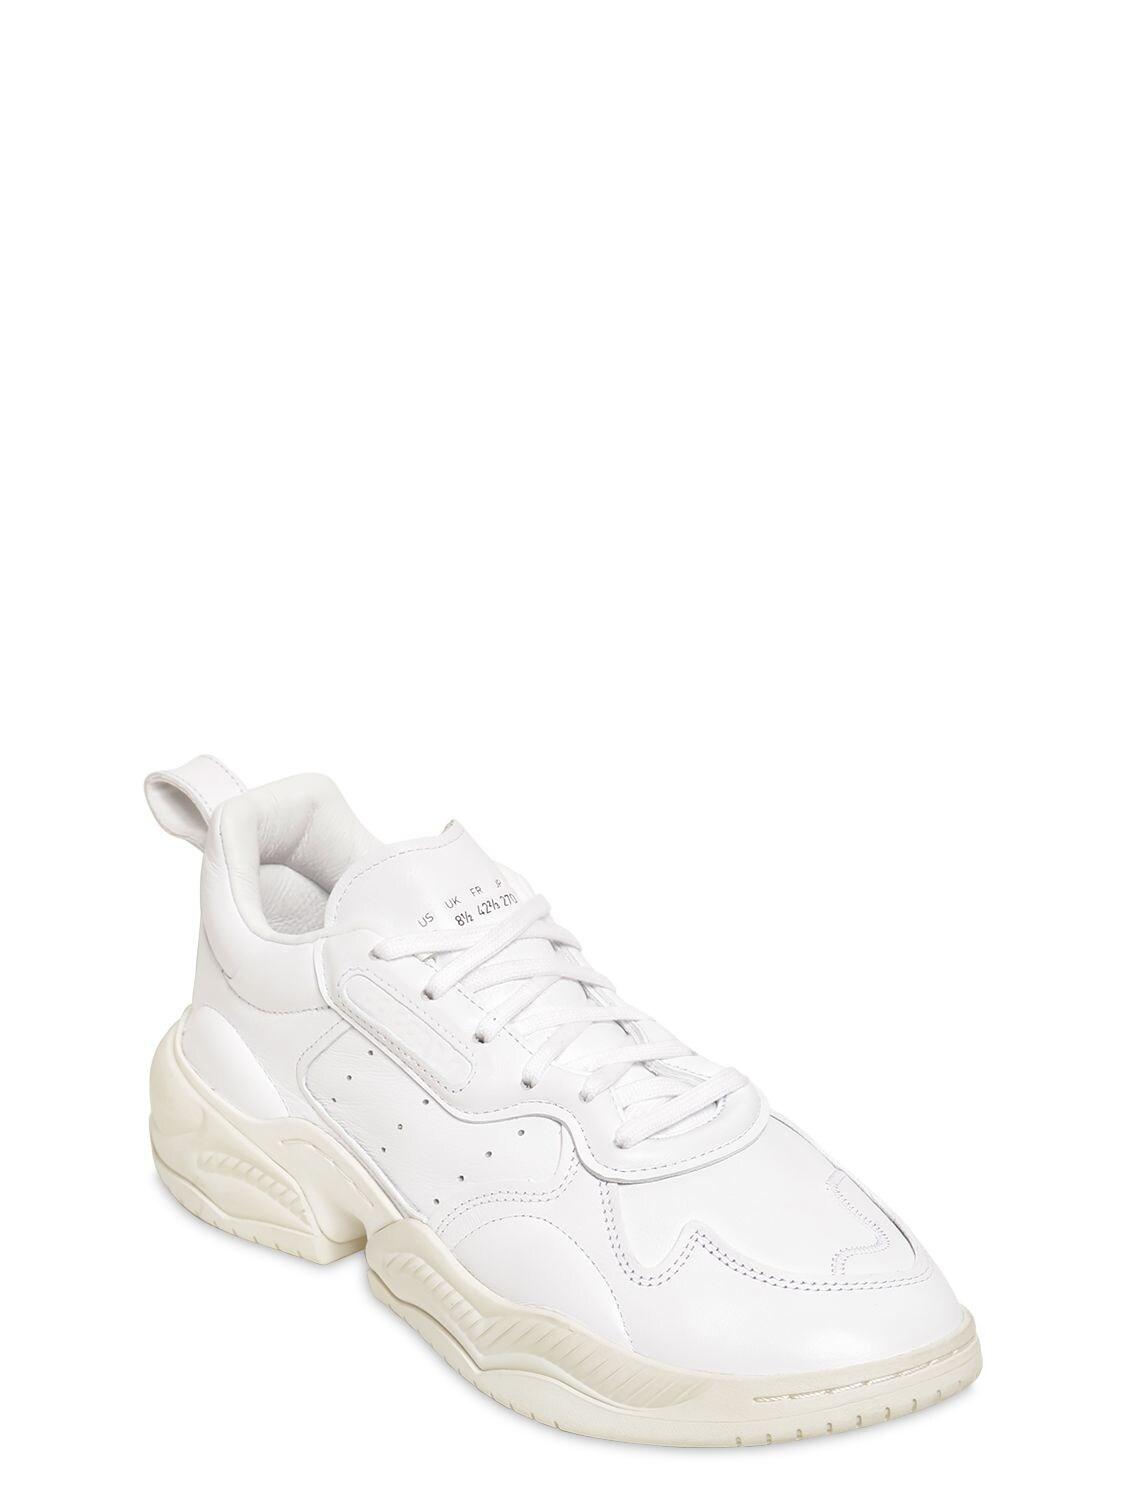 adidas Originals Supercourt Rx Raw White Leather Trainers for Men ...